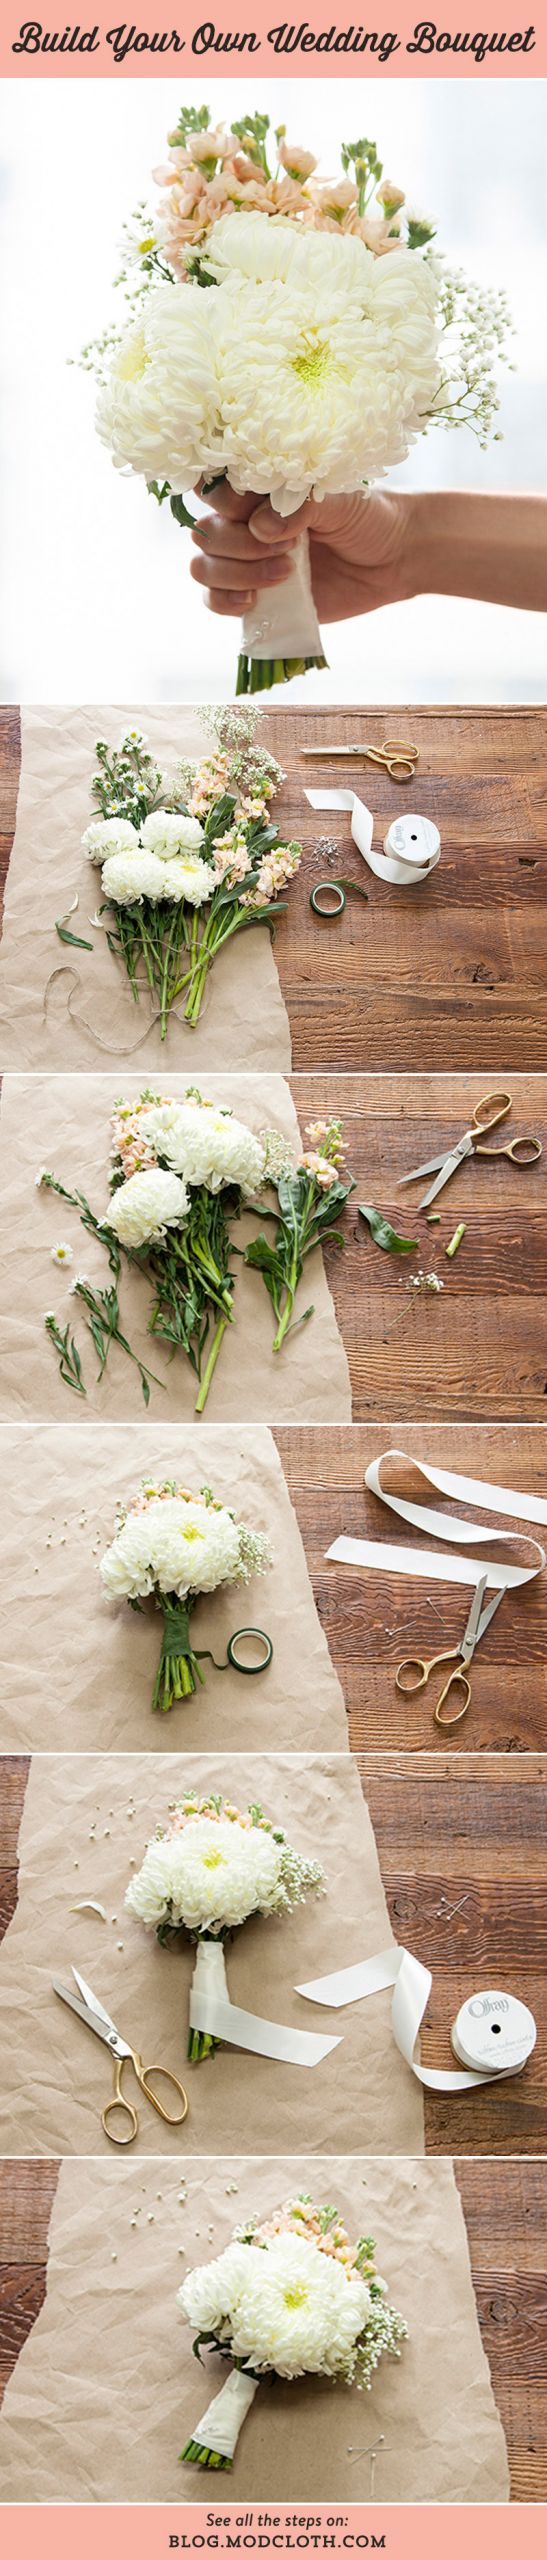 DIY Wedding Bouquet
 Build Your Own Wedding Bouquet With This Easy DIY